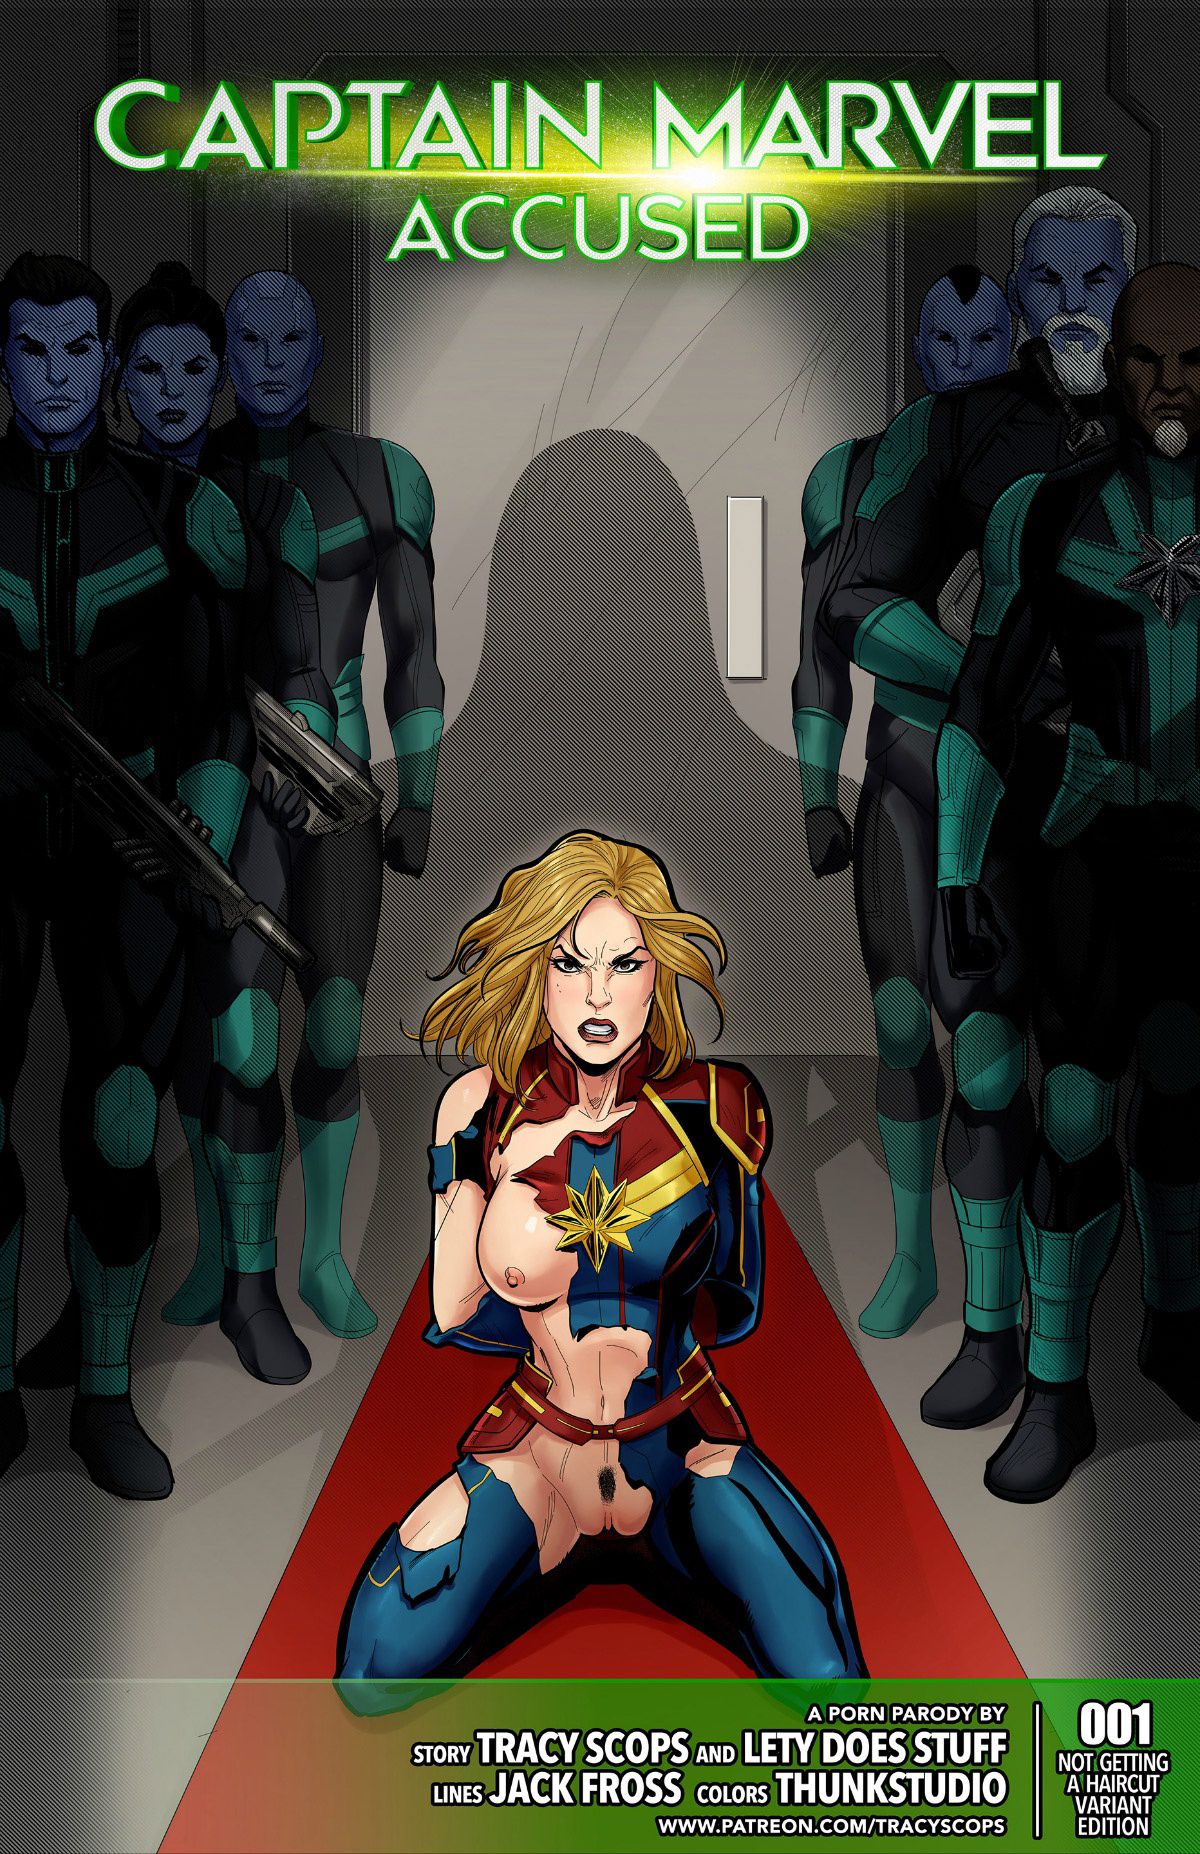 Accused (Captain Marvel) Tracy Scops image